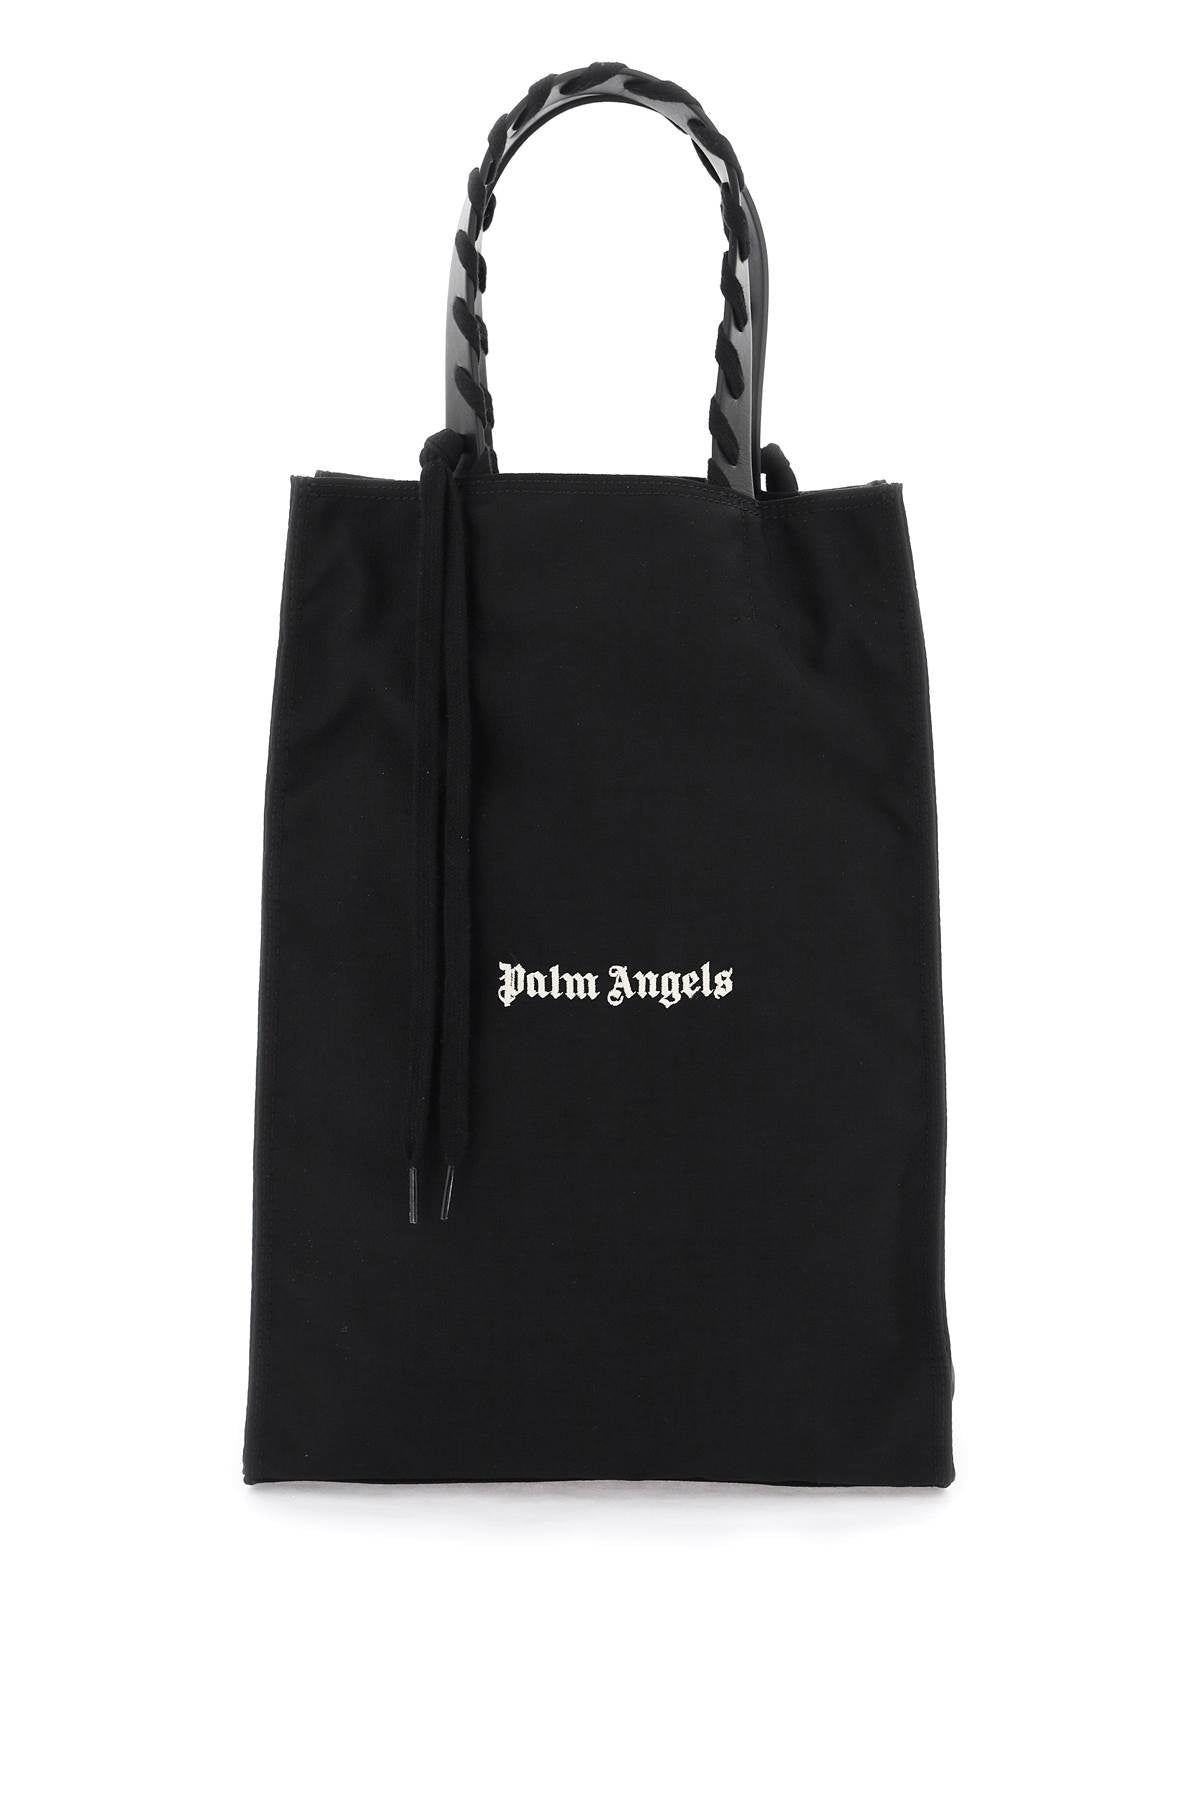 Palm angels embroidered logo tote bag with-0